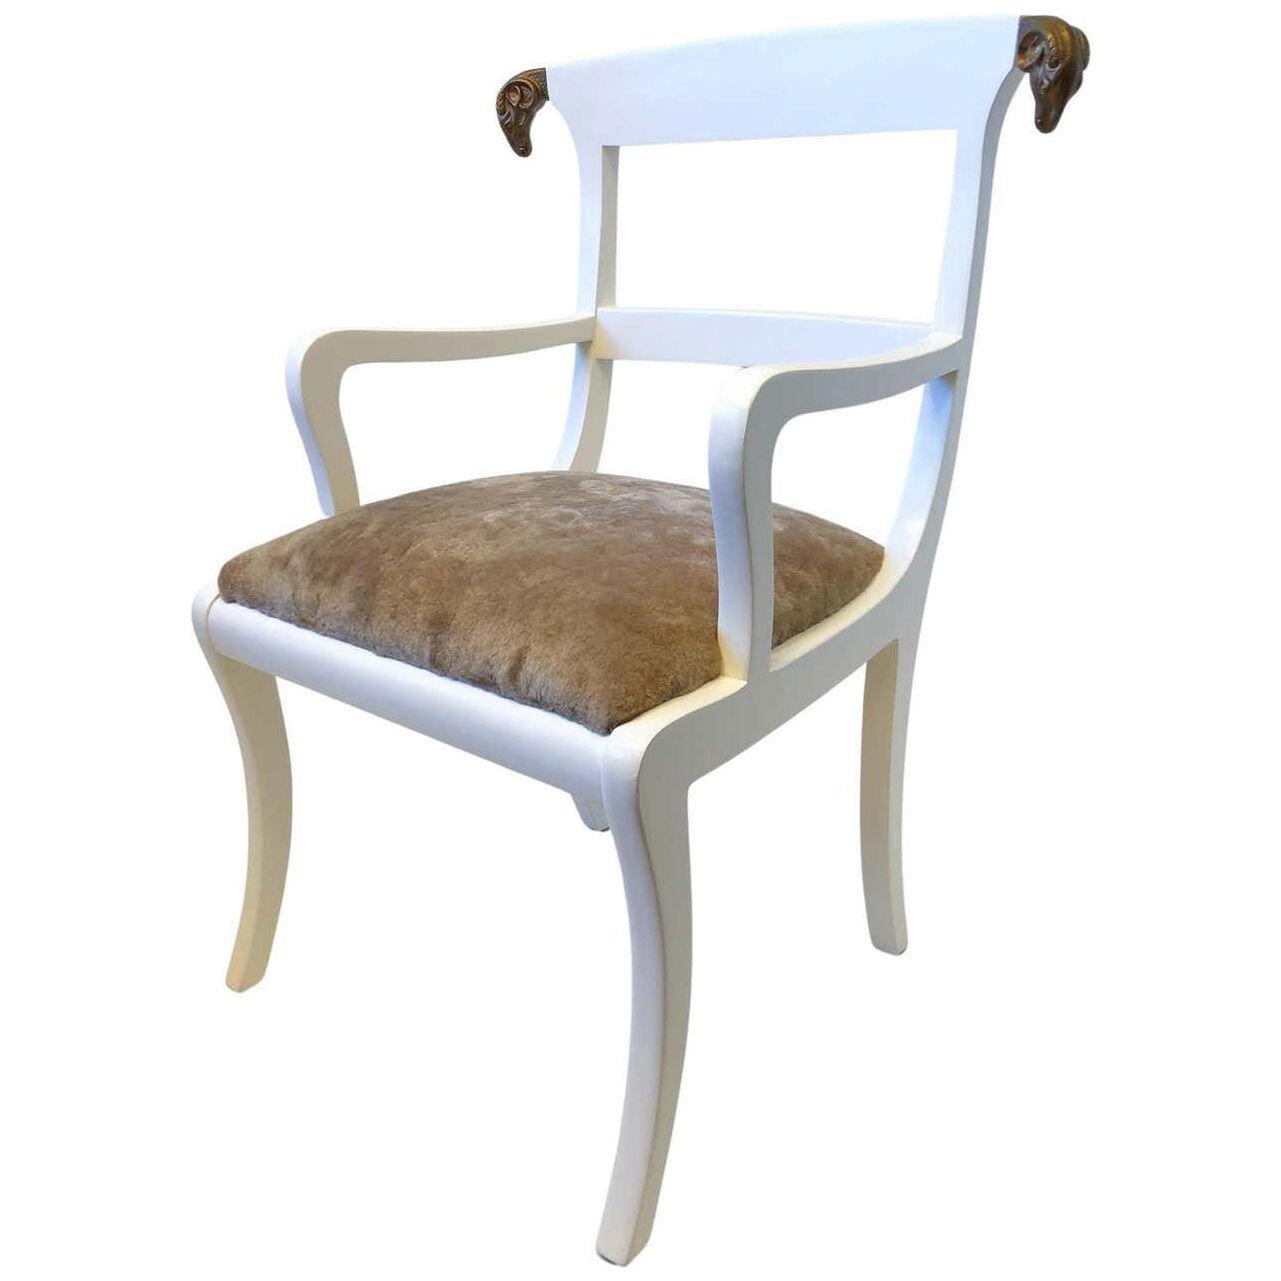 White Lacquer and Gold Rams Head Armchair by Enrique Garcel